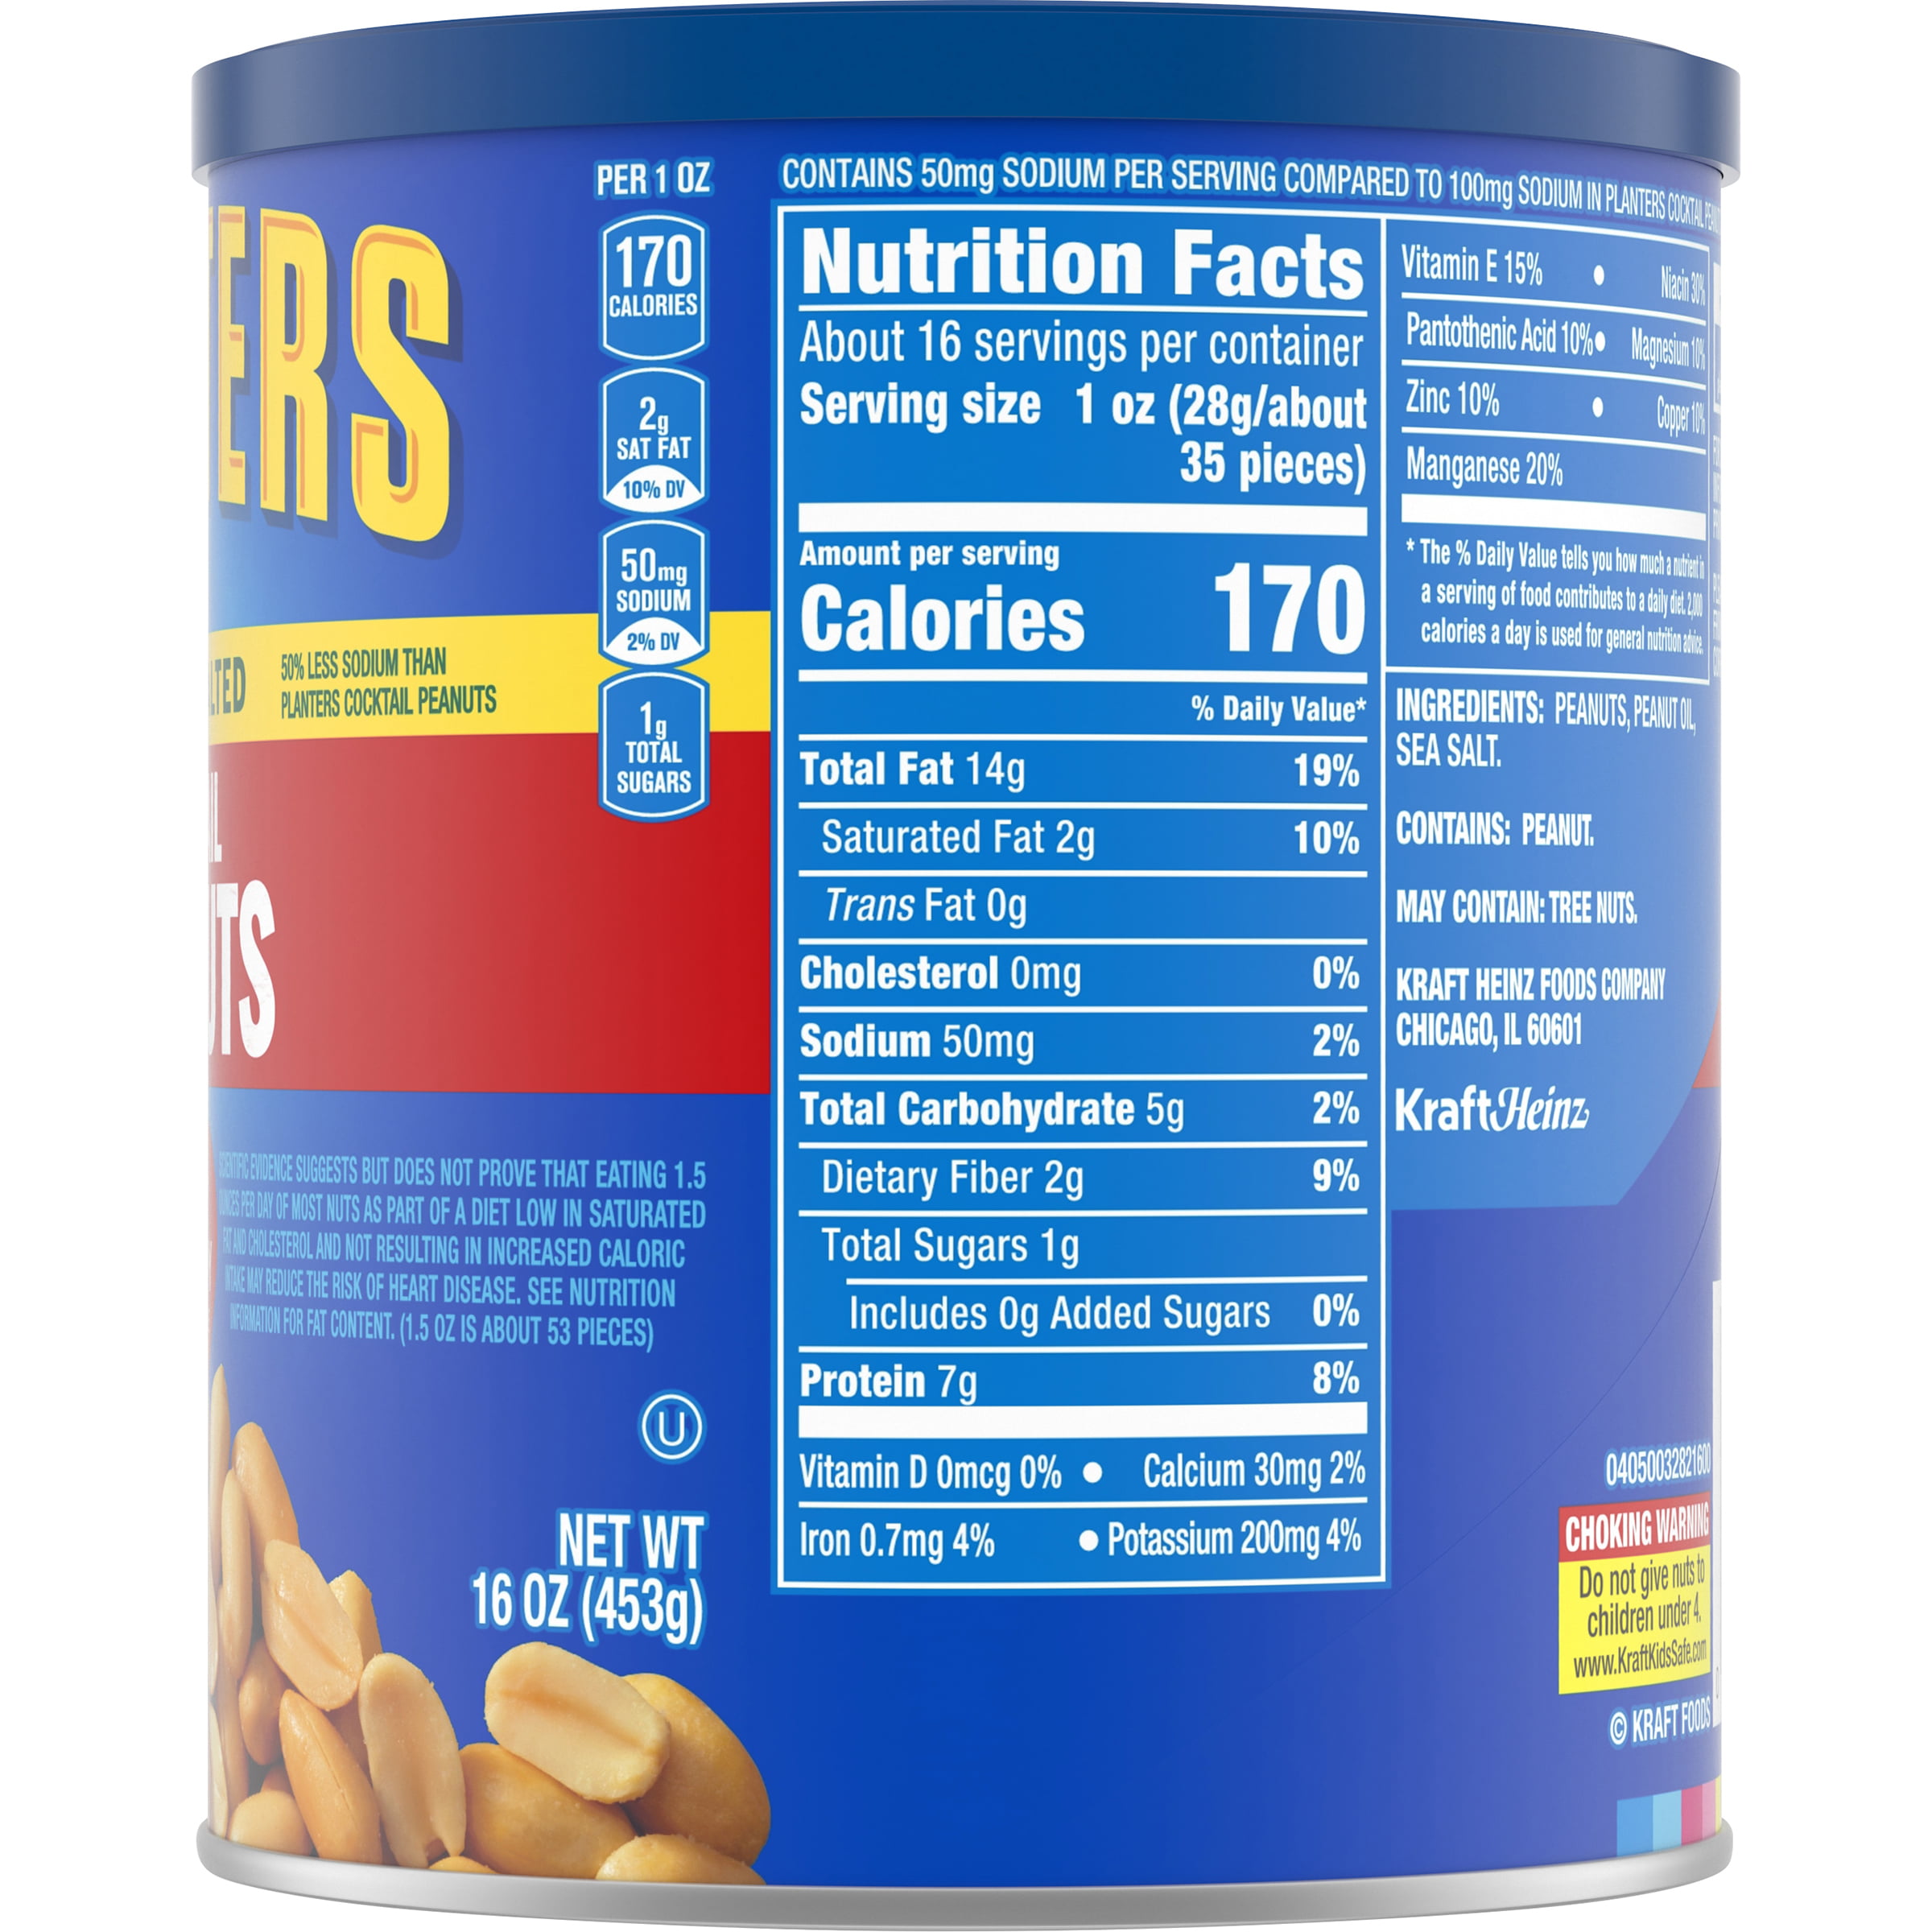 No nuts peanuts 180 allergy caution labels Peel /& Stick Personalized.